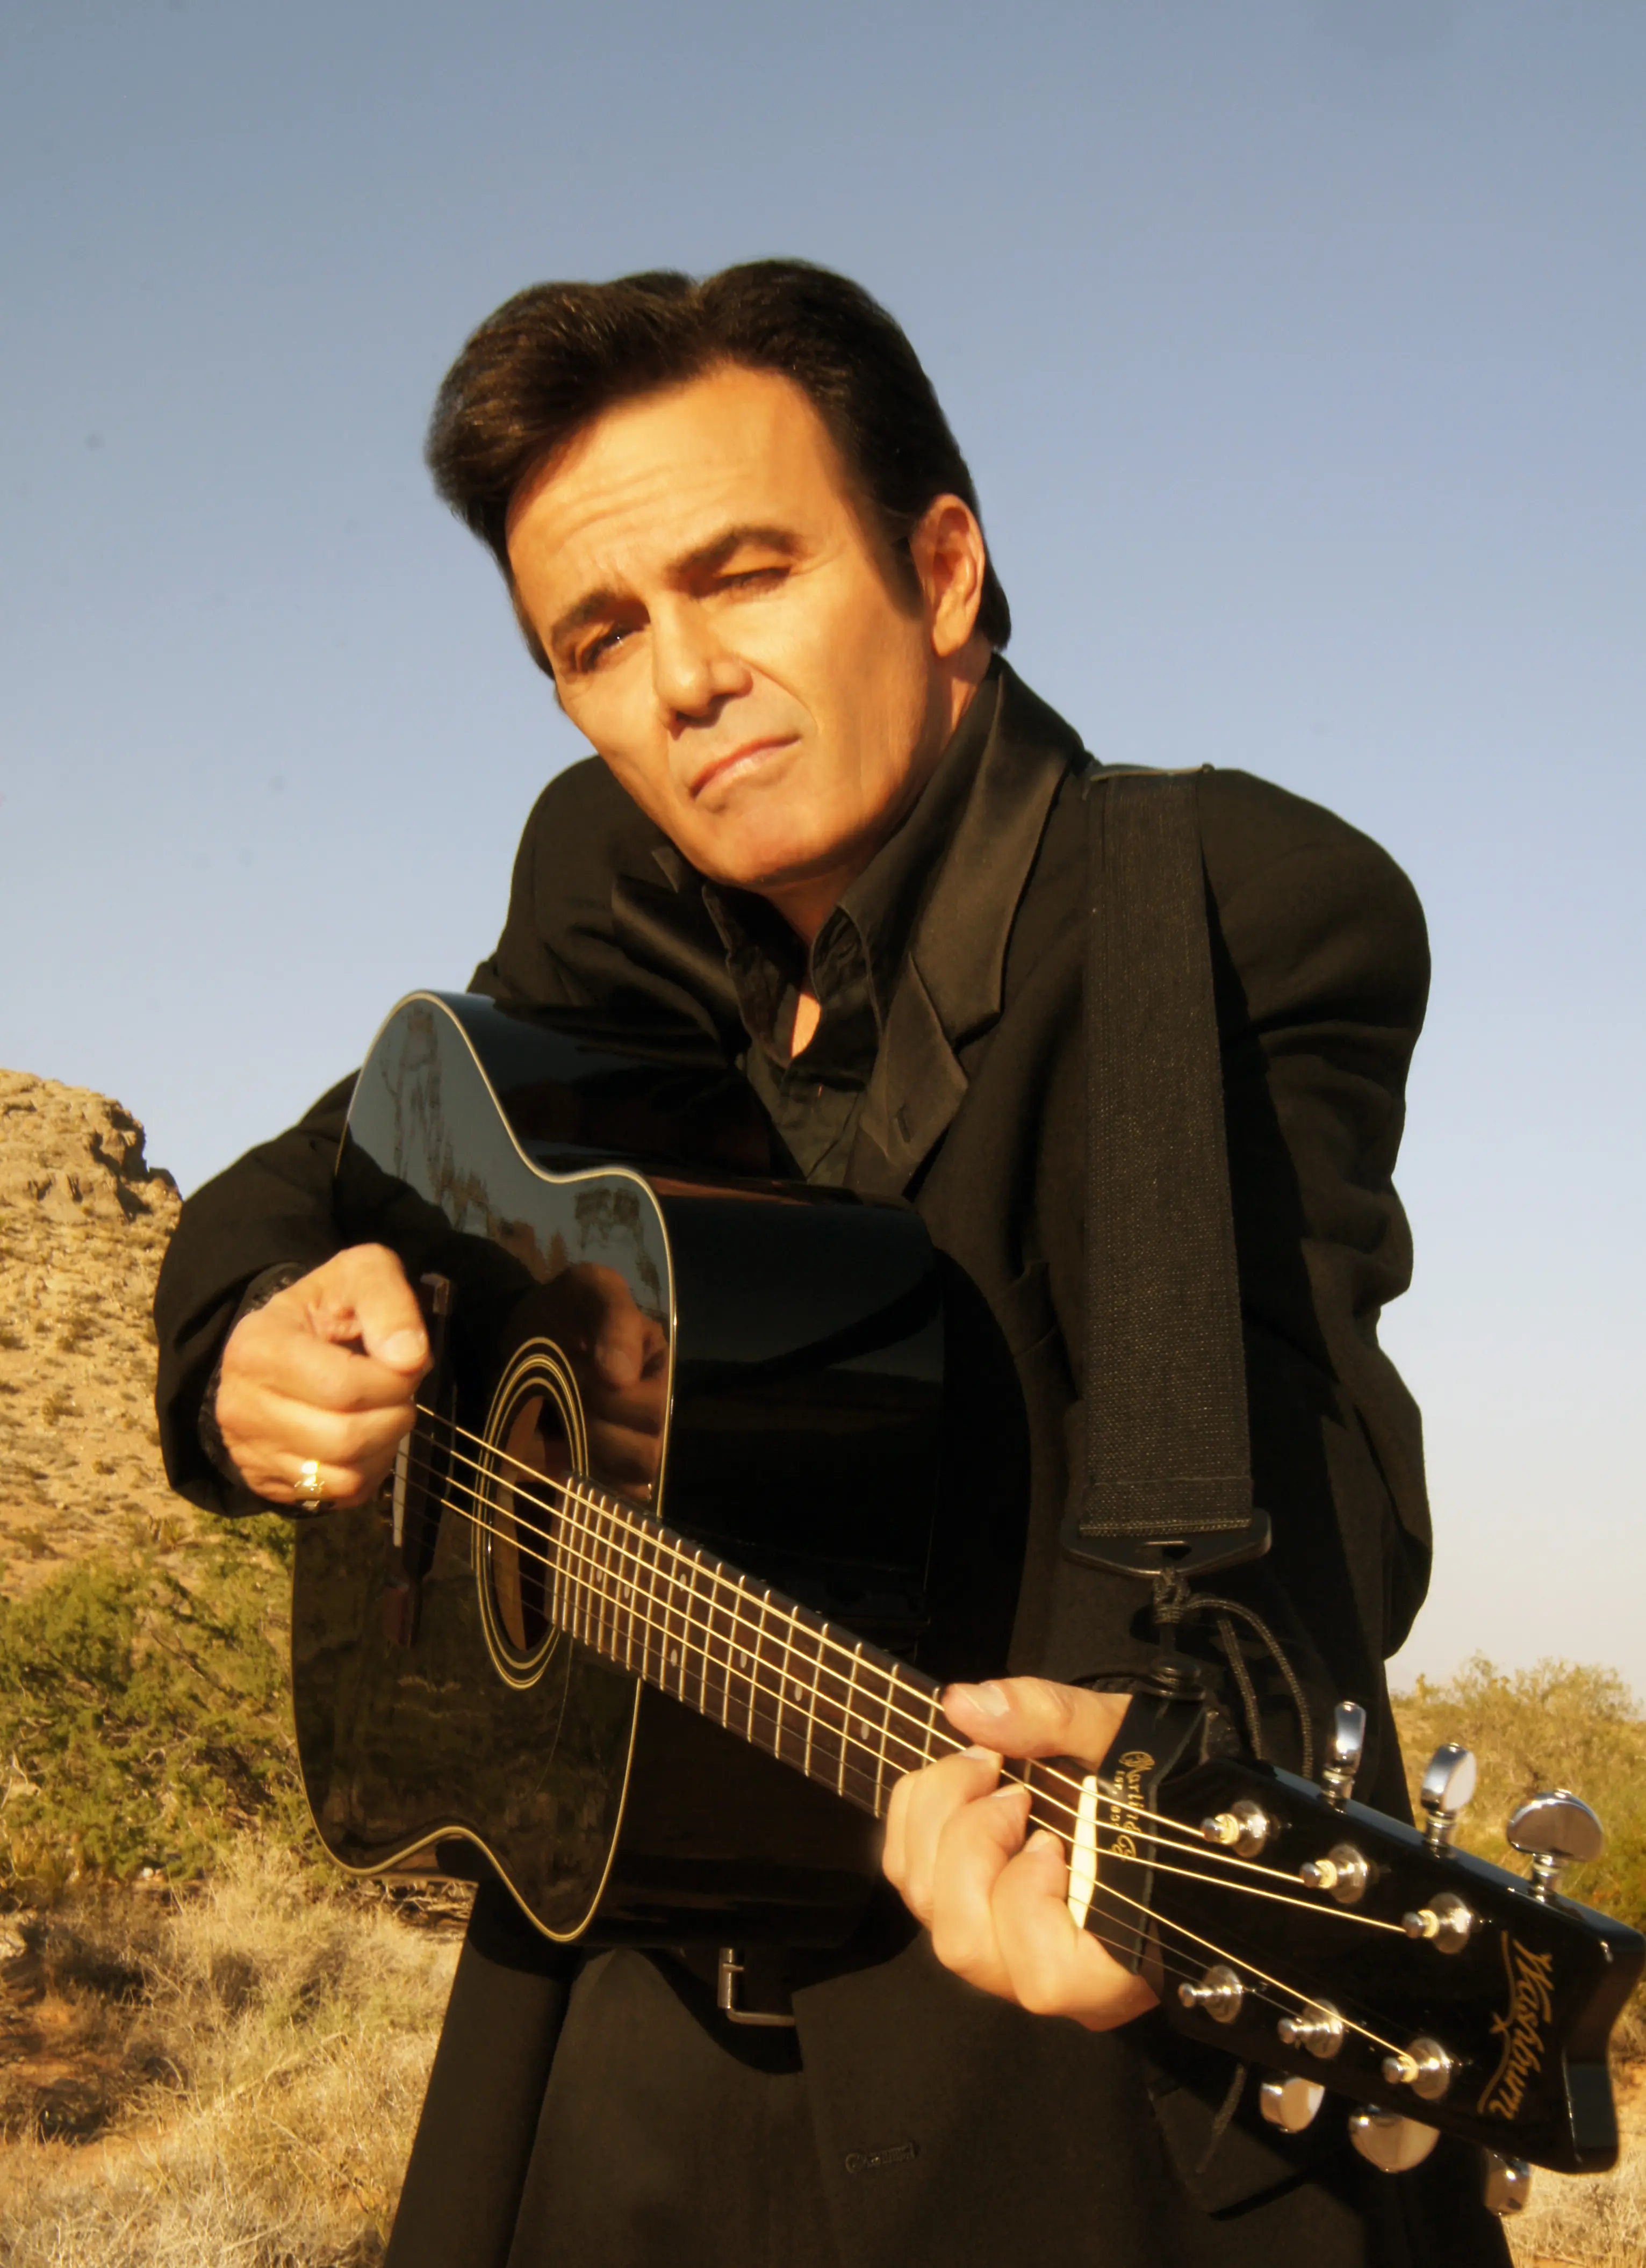 Peter As Johnny Cash